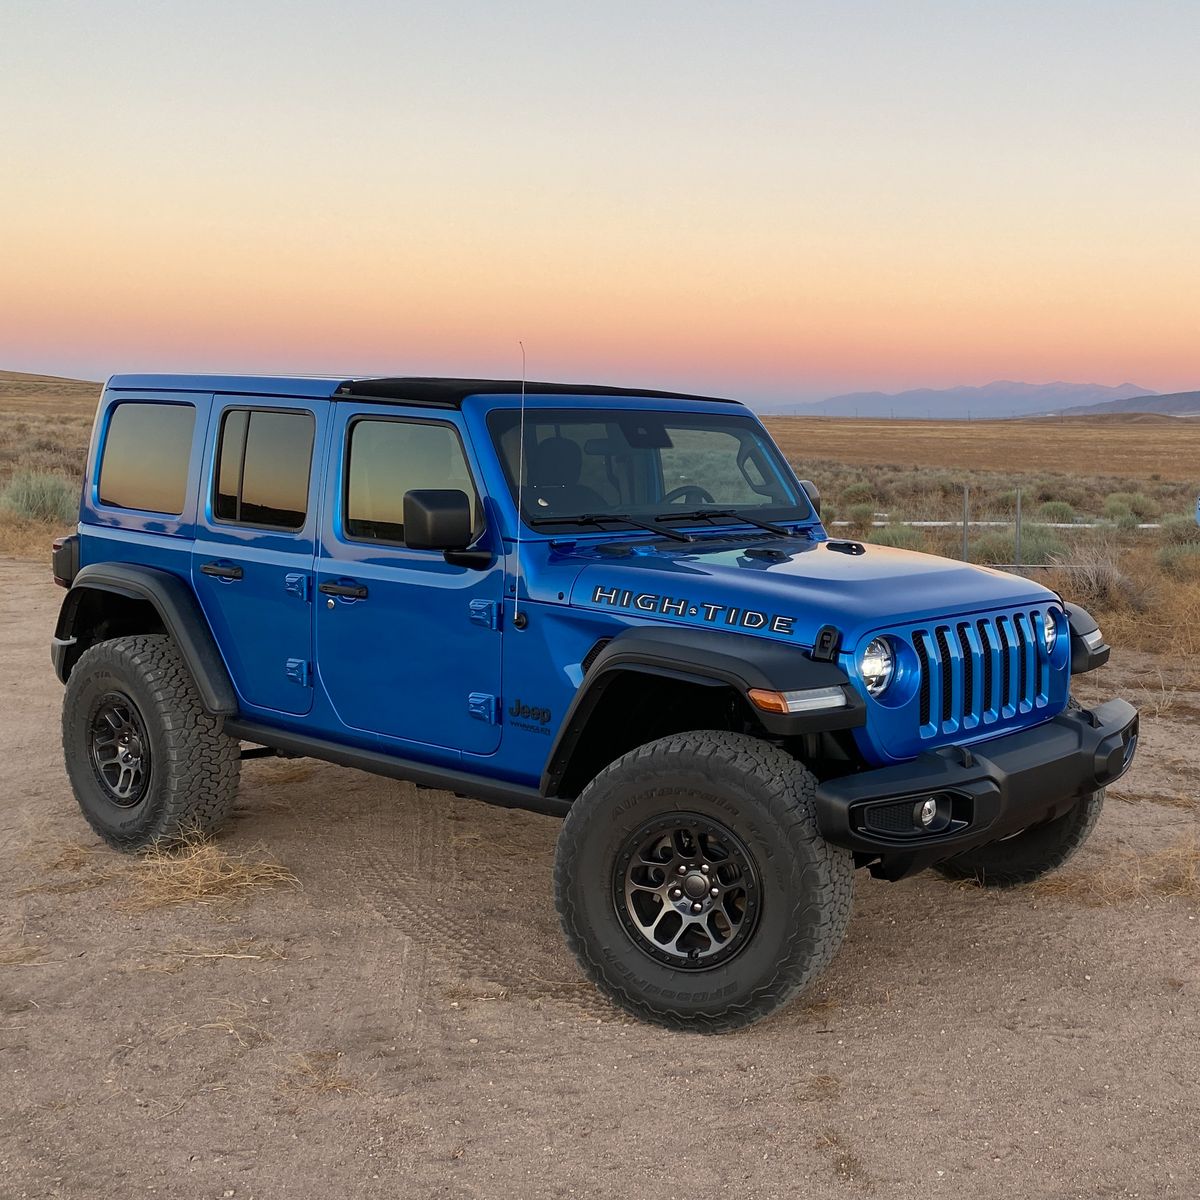 Tested: 2022 Jeep Wrangler High Tide Stands Tall